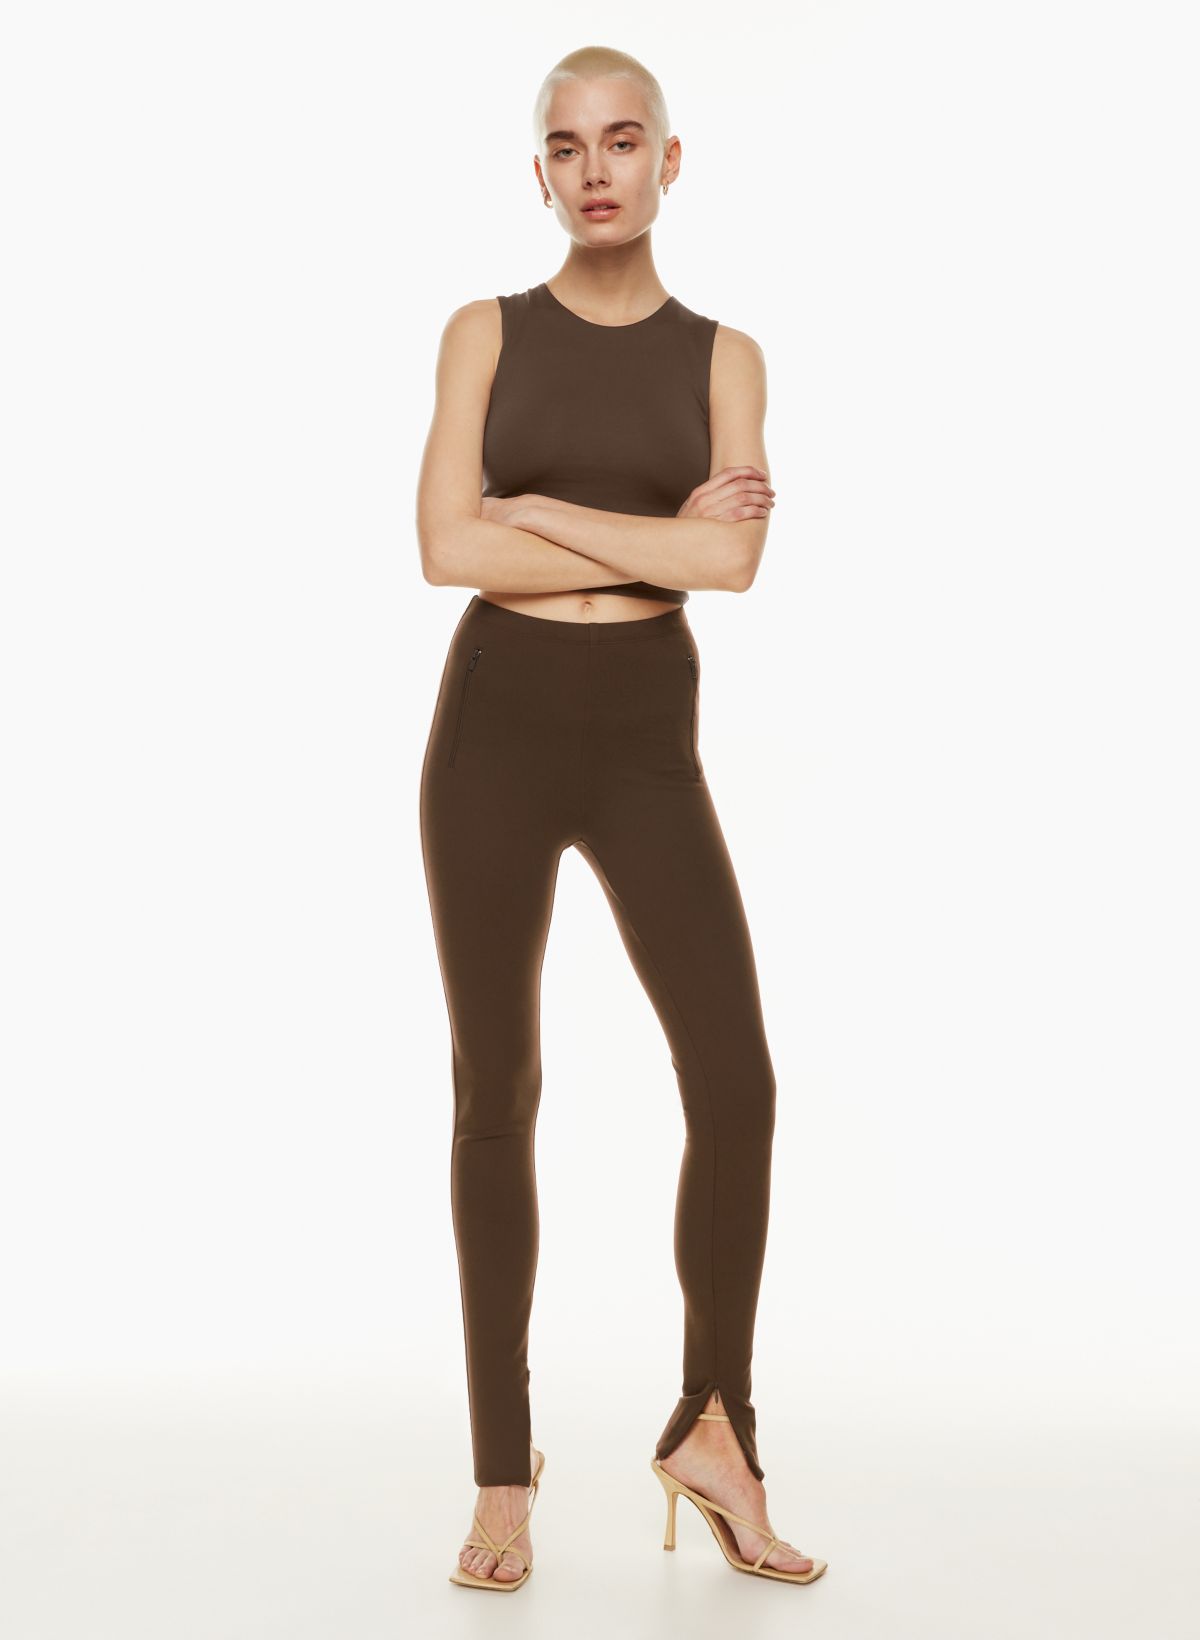 COMFY ONE Seamless Leggings with 4 Pockets for Women Compression Cargo